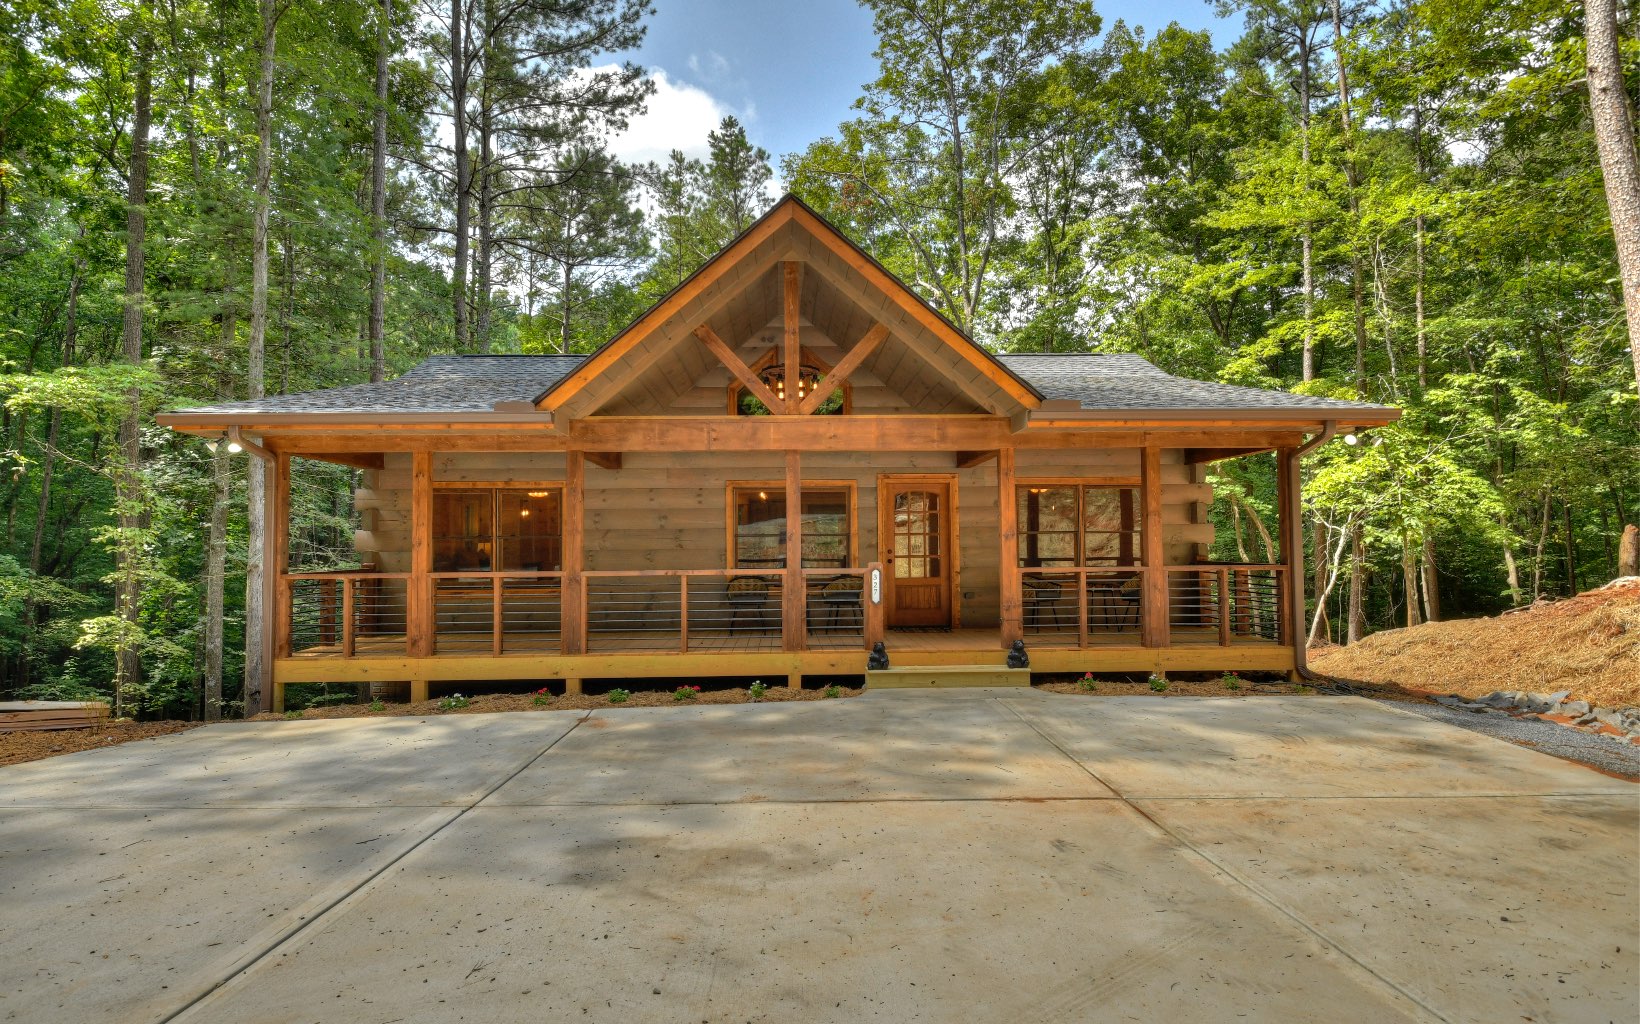 NEW PRICE ON THIS BEAUTIFUL AND TRANQUIL NEW CONSTRUCTION TRUE LOG CABIN! Beautiful wood finishes throughout including circular saw hardwood flooring and cabinetry. Sandstone granite countertops and unique rustic lighting help give this cabin a mountain touch you will fall in love with. Lots of windows provide natural lighting that showcases the detailed finishes such as a rock fireplace that extends to the beamed ceilings with a large, open living area. Large, oversized covered porches with vaulted ceilings add to the outdoor space of this cabin on one of the most beautiful private and wooded lots in Coosawattee. The large backyard is perfect for outdoor activities, enjoying nature, and enjoying the sounds of the Coosawattee River. This cabin is nestled among towering hardwood trees & close to downtown Ellijay. Close to downtown Ellijay, vacation rentals allowed, and lots of amenities in this gated community!